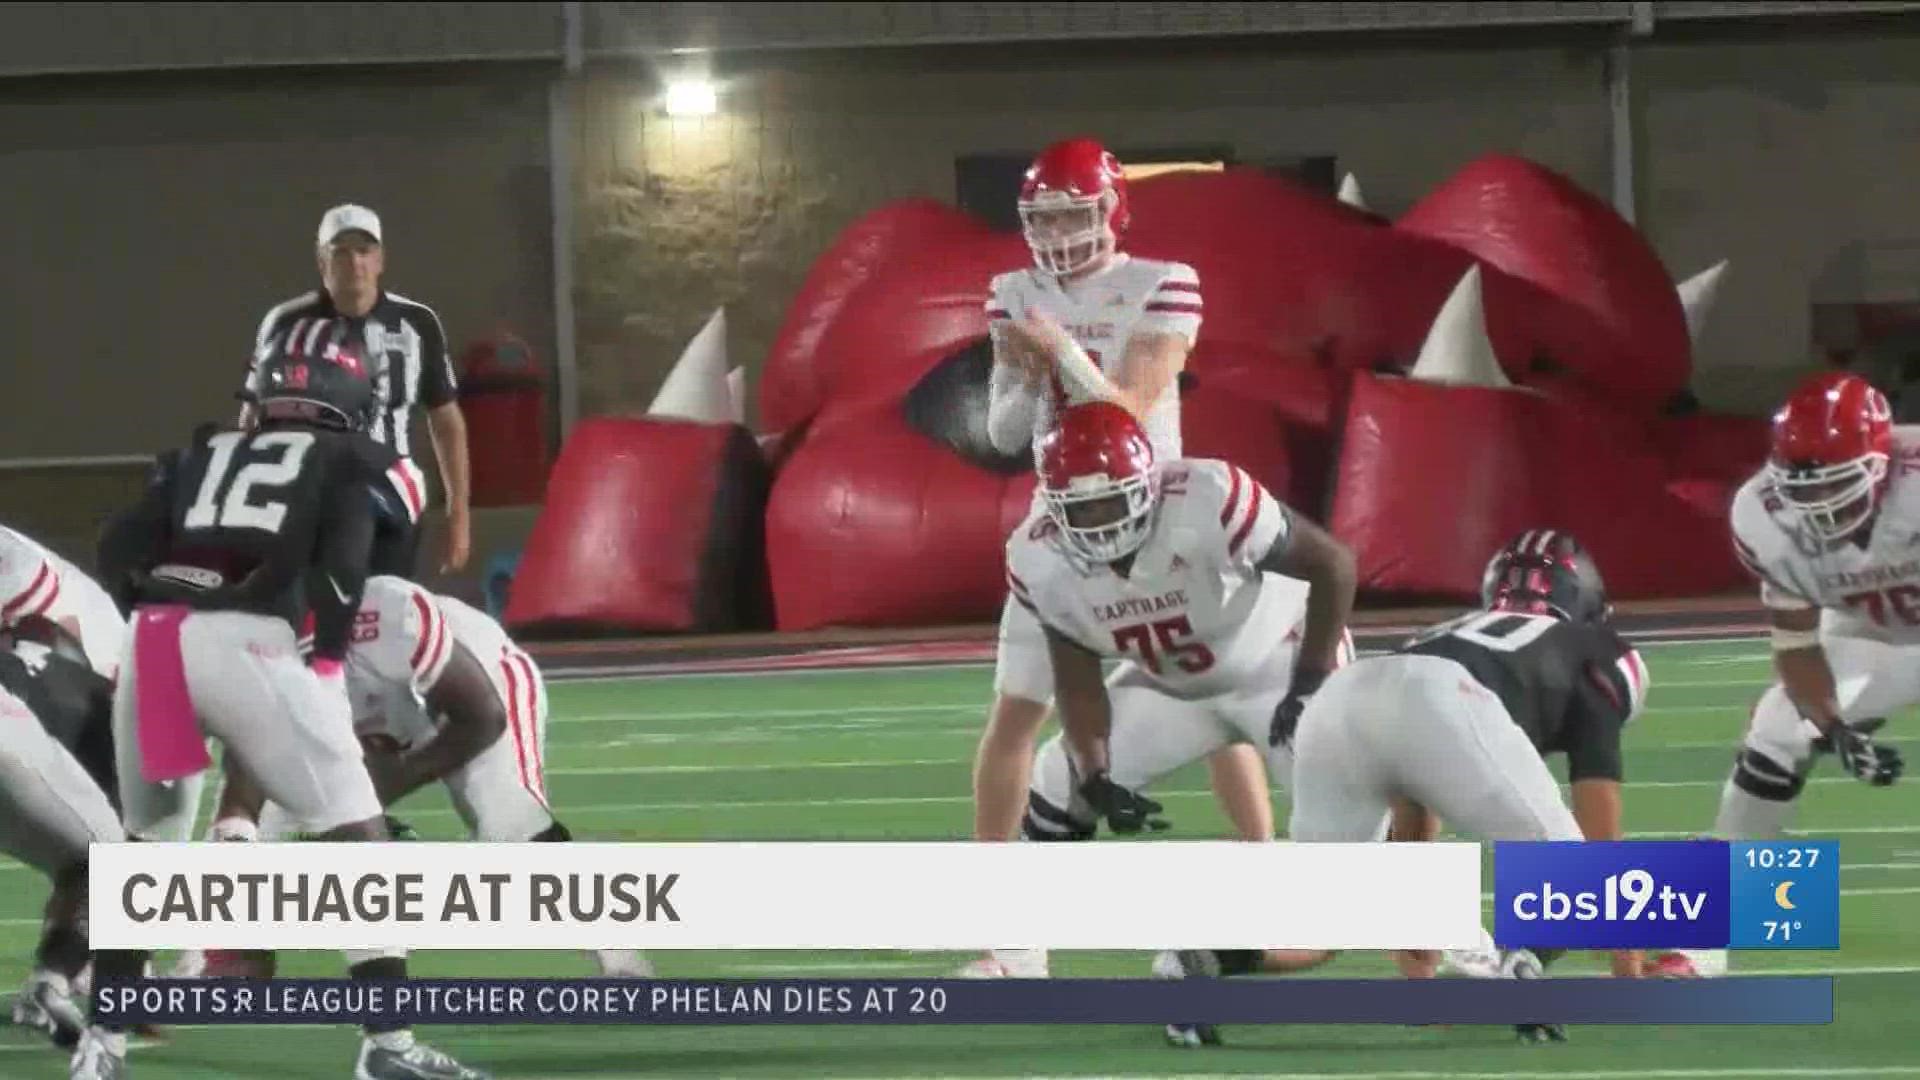 For more East Texas high school football, visit CBS19.tv/Under-The-Lights.